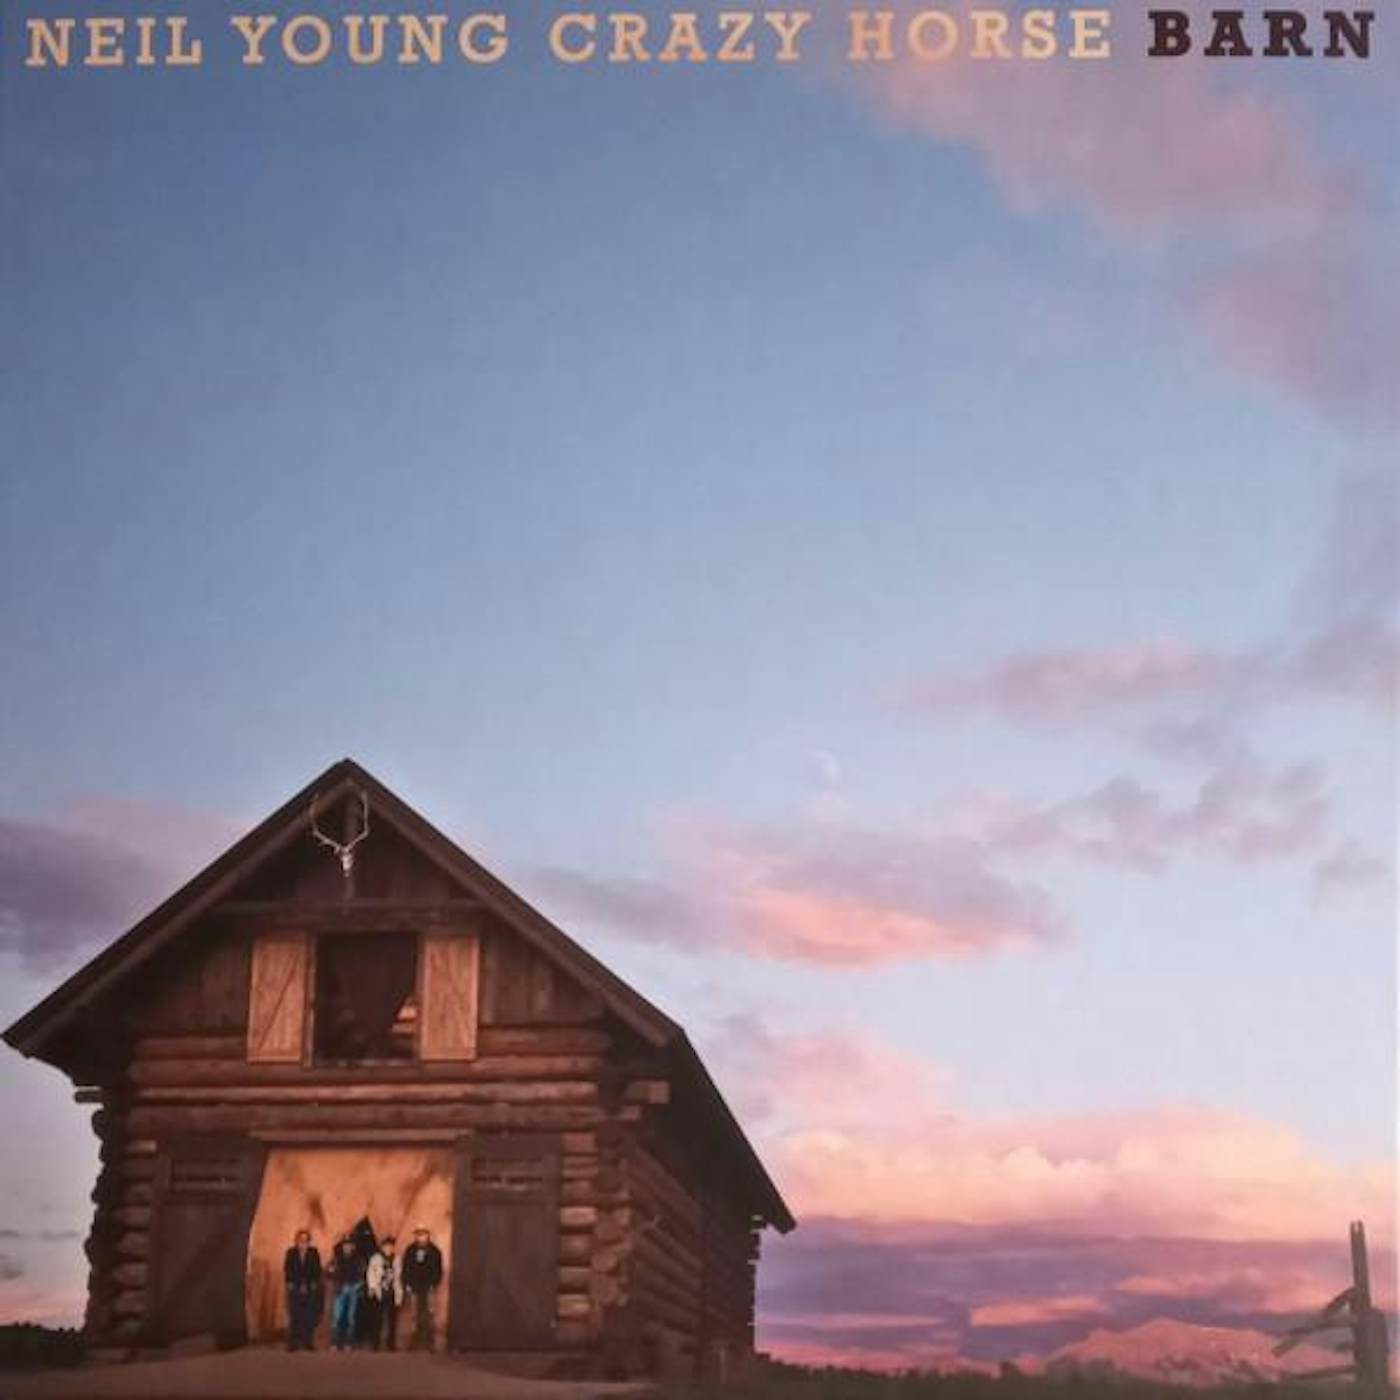 Neil Young & Crazy Horse BARN CD